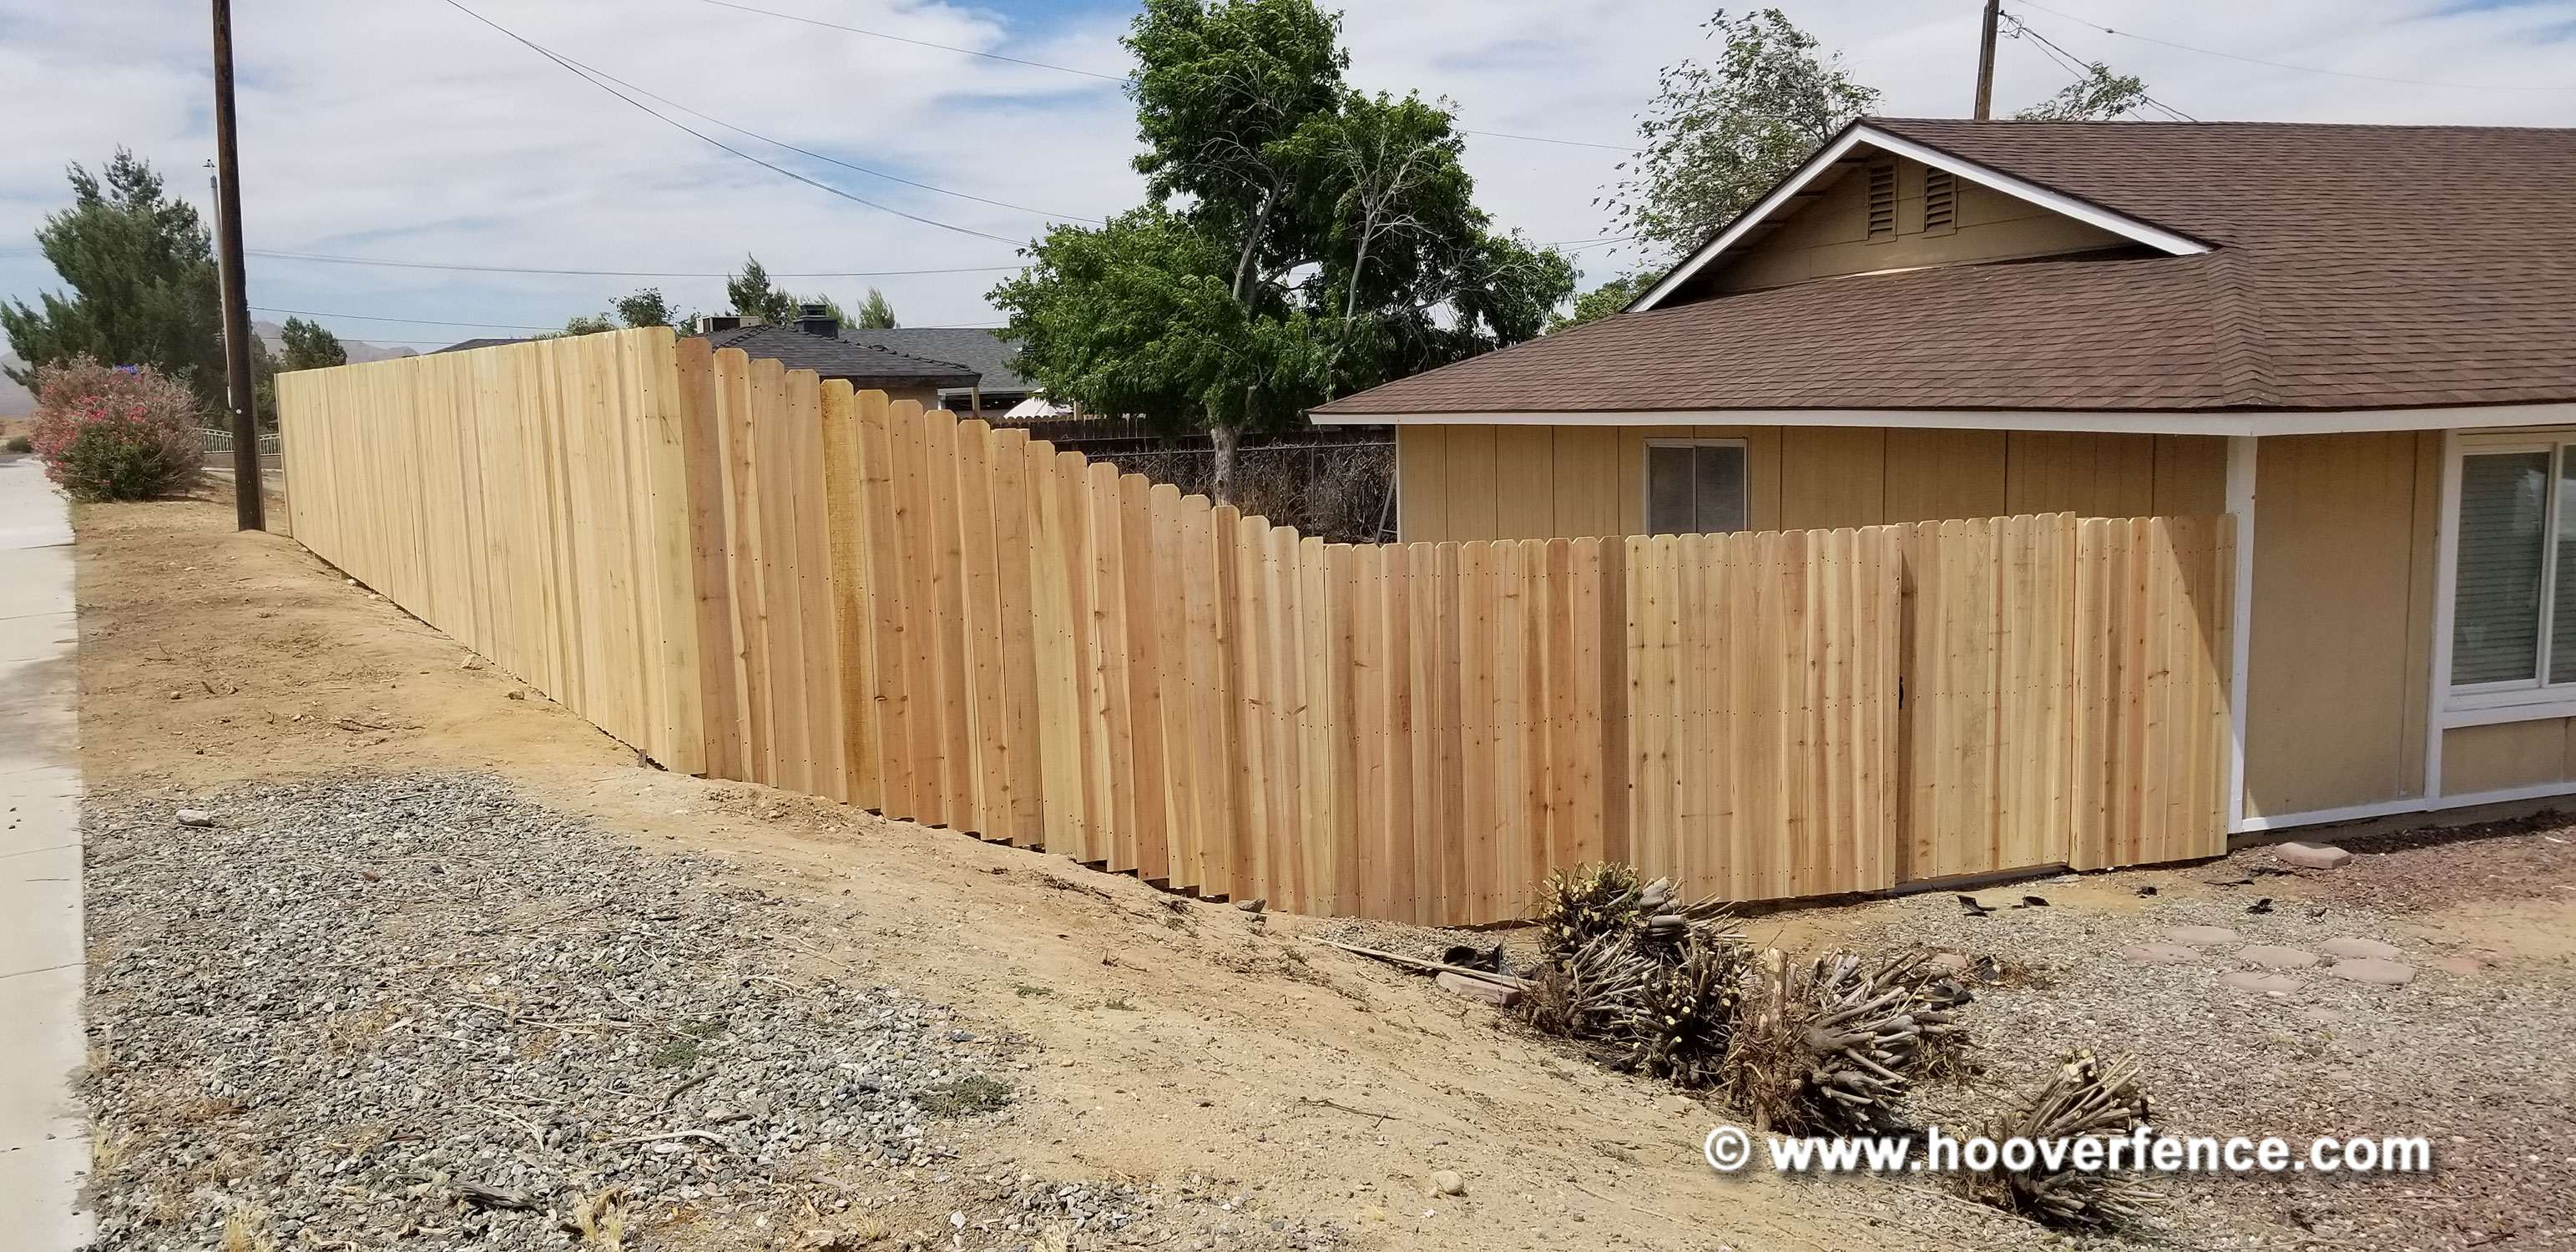 Customer Photo - 6'H Dog Ear Wood Fence Installed with Chain Link Fence Posts and IS-FBL-L Fence Brackets